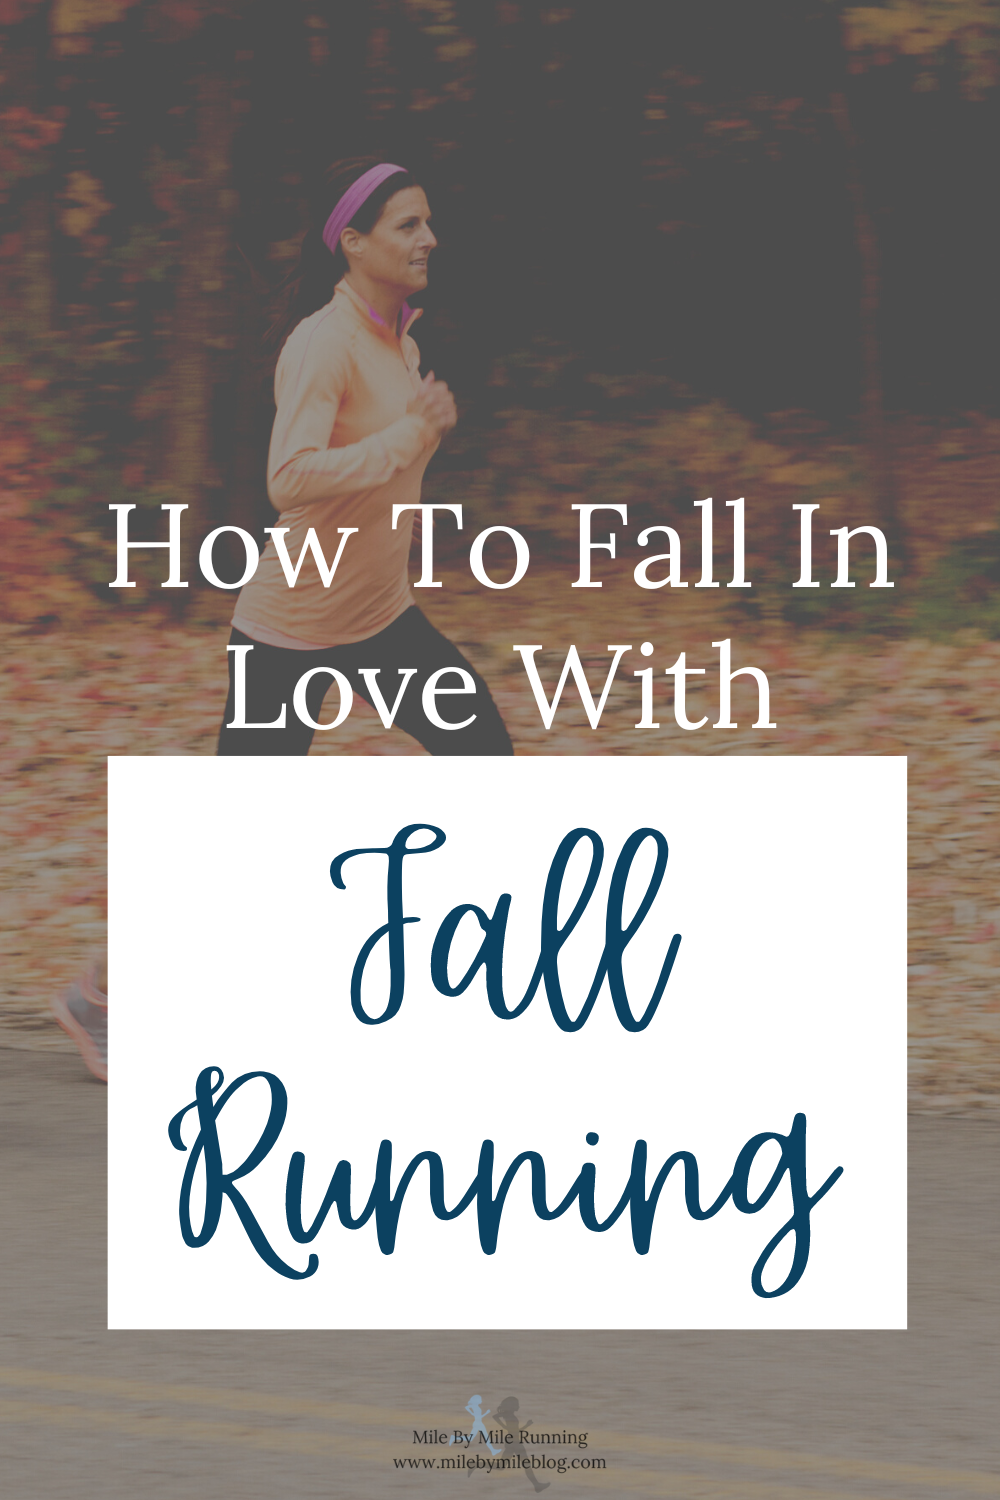 Fall is a time of year that many runners can't wait for. After a long, hot summer the cooler temps and low humidity are welcomed with open arms. However, fall running is not everyone's favorite. If you are looking to fall in love with fall running, here are some tips to get you started.